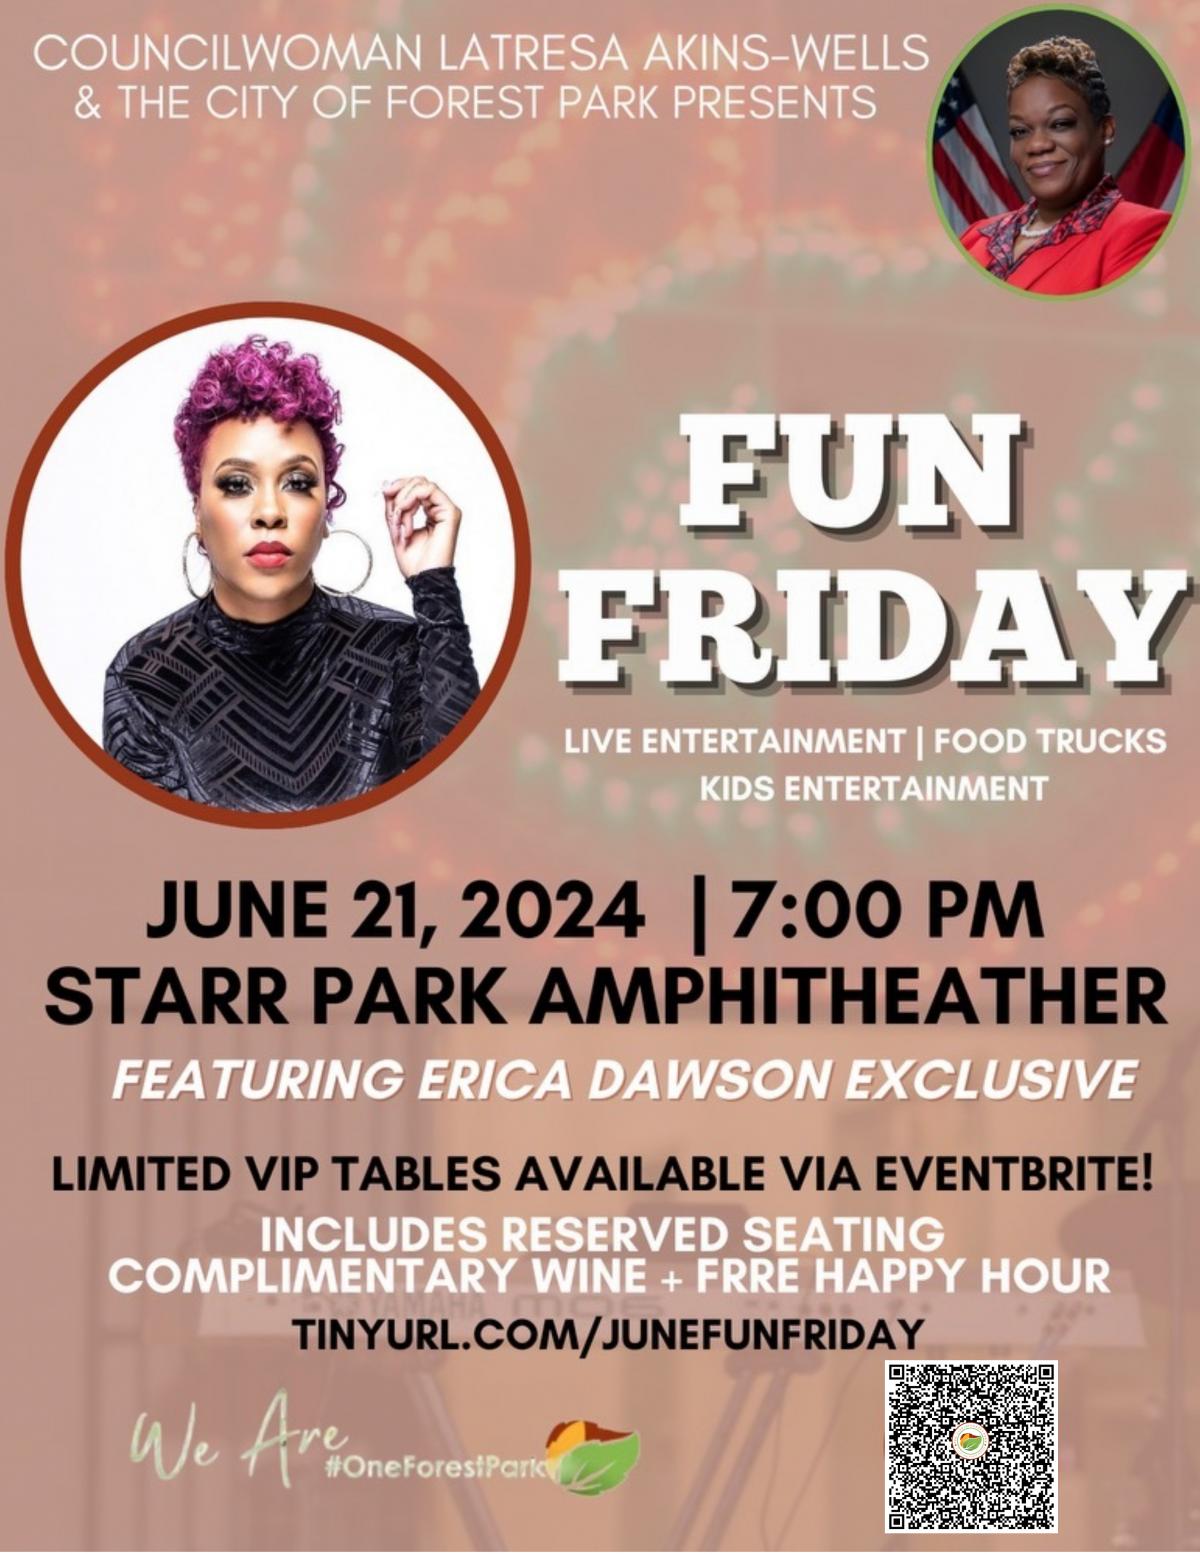 Councilwoman Latresa Akins-Wells & the City of Forest Park host Fun Friday. 